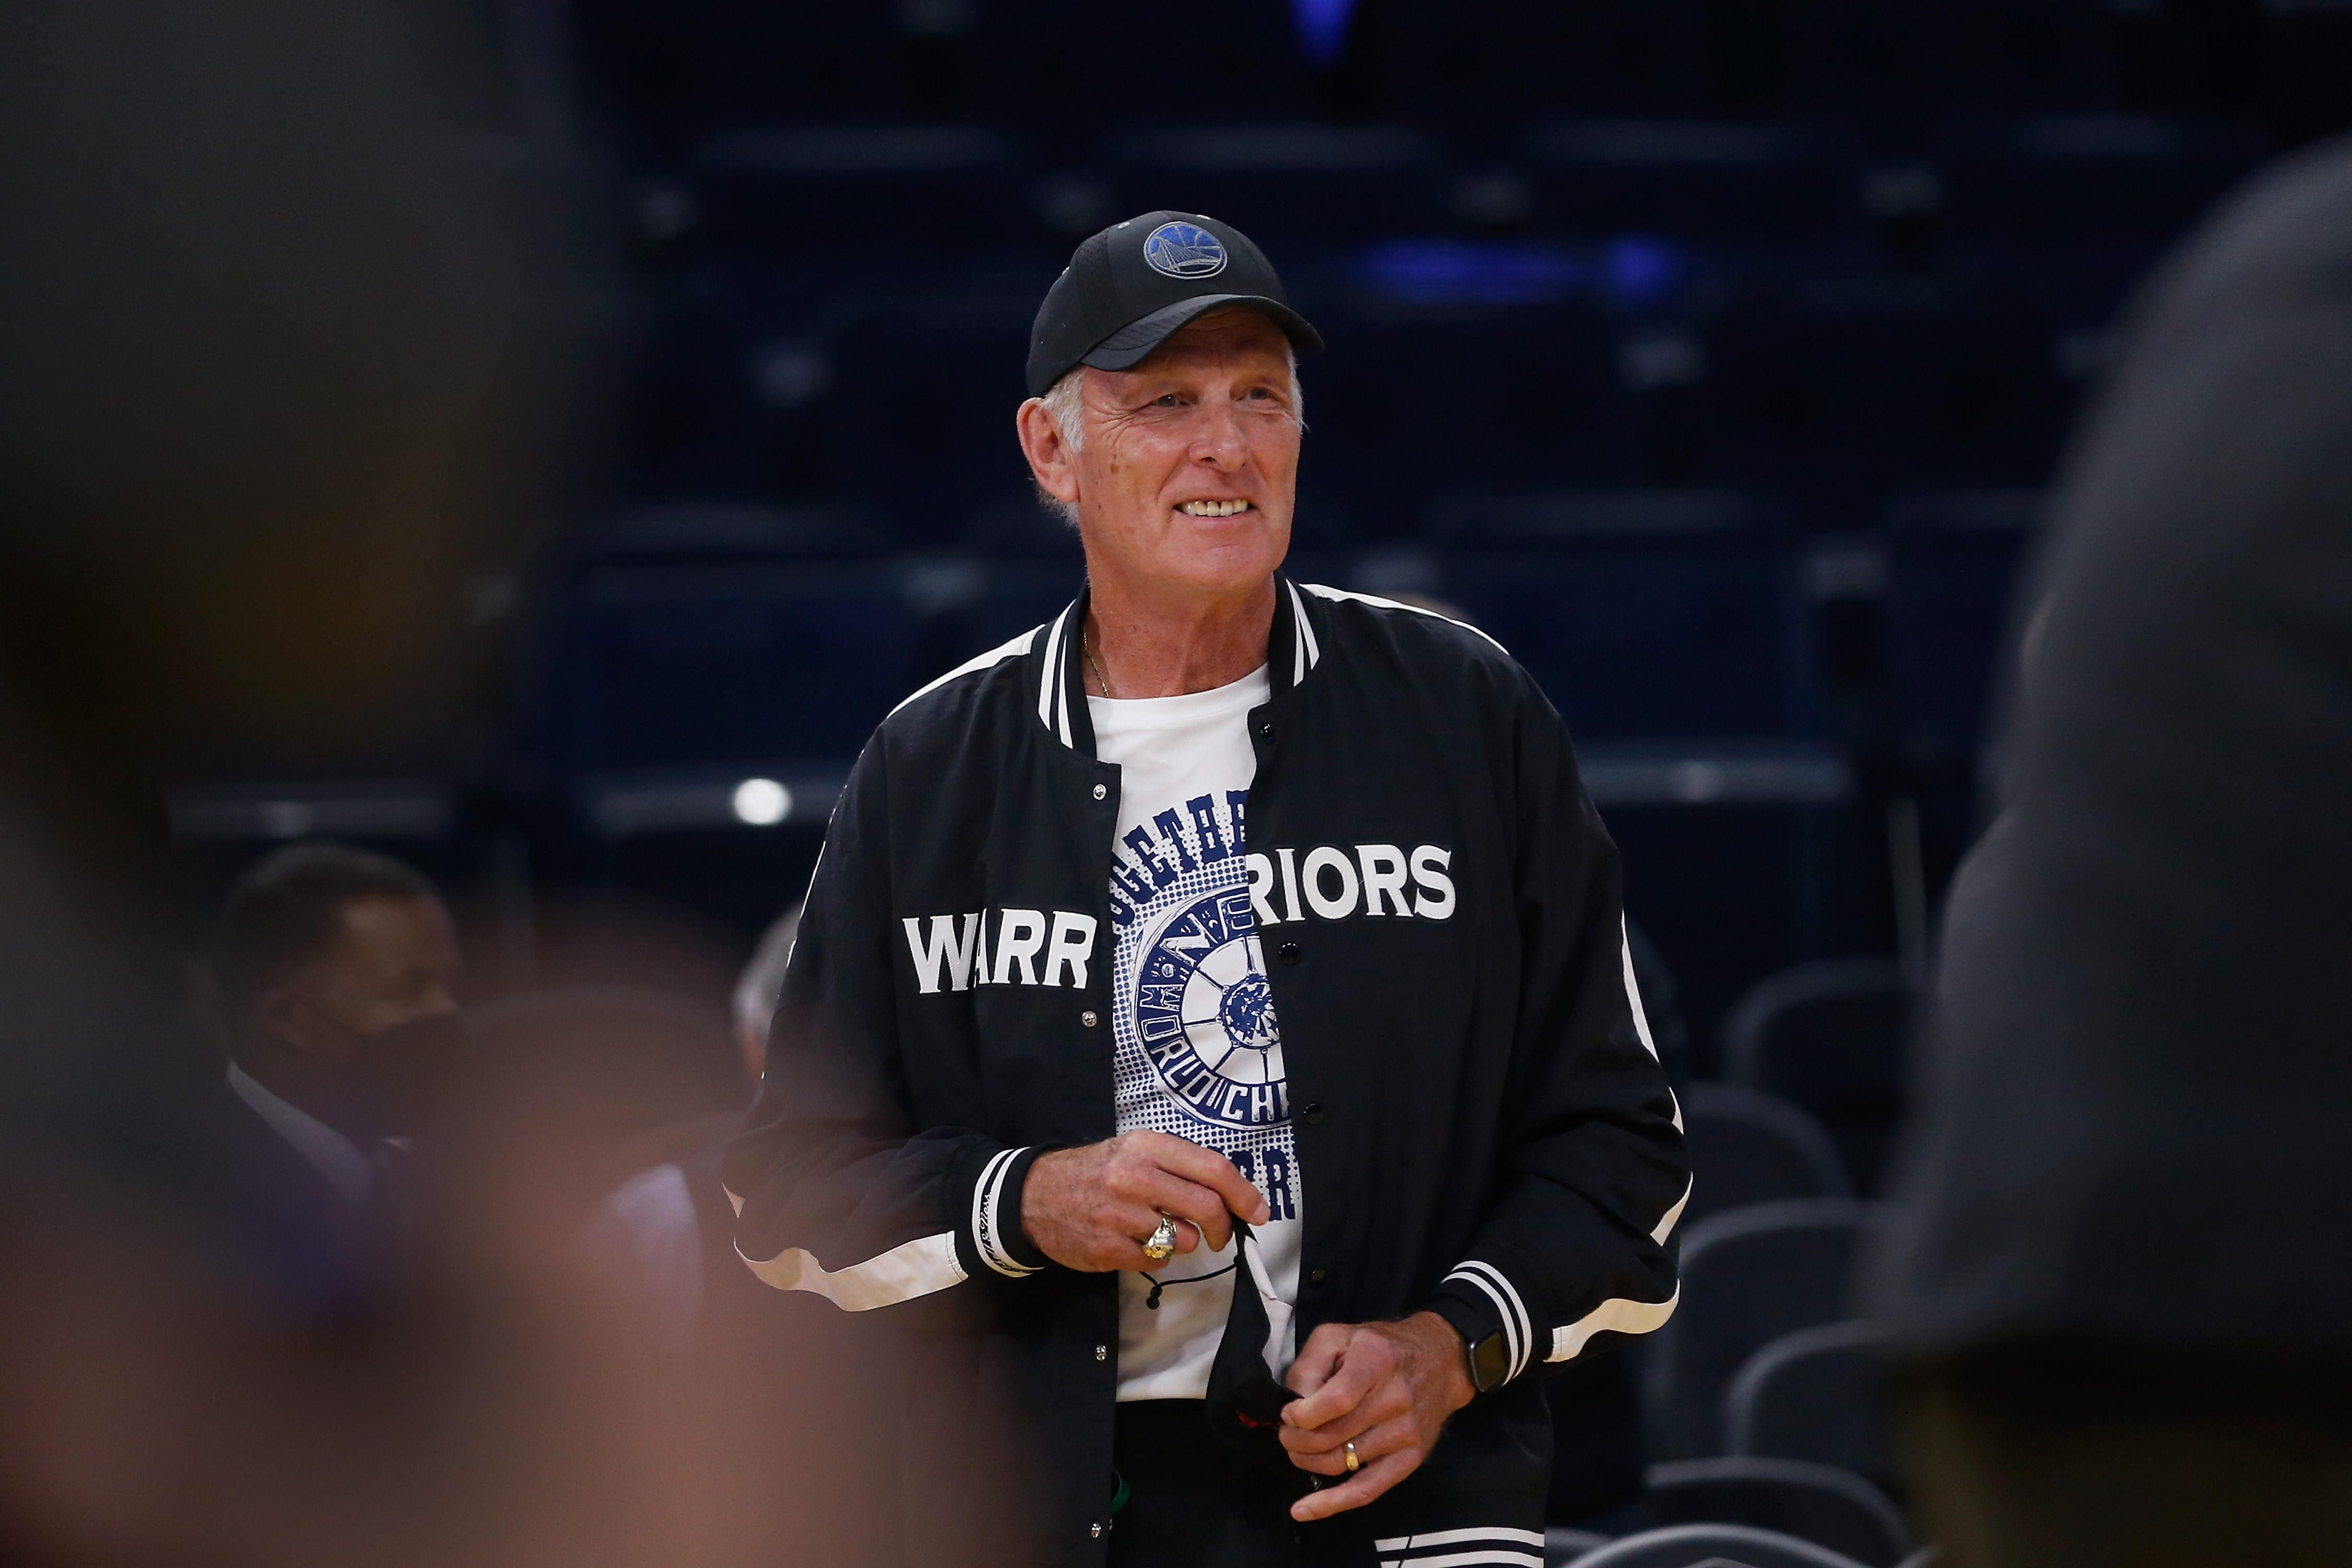 Former Golden State Warriors player Rick Barry looks on before the game against the Houston Rockets.